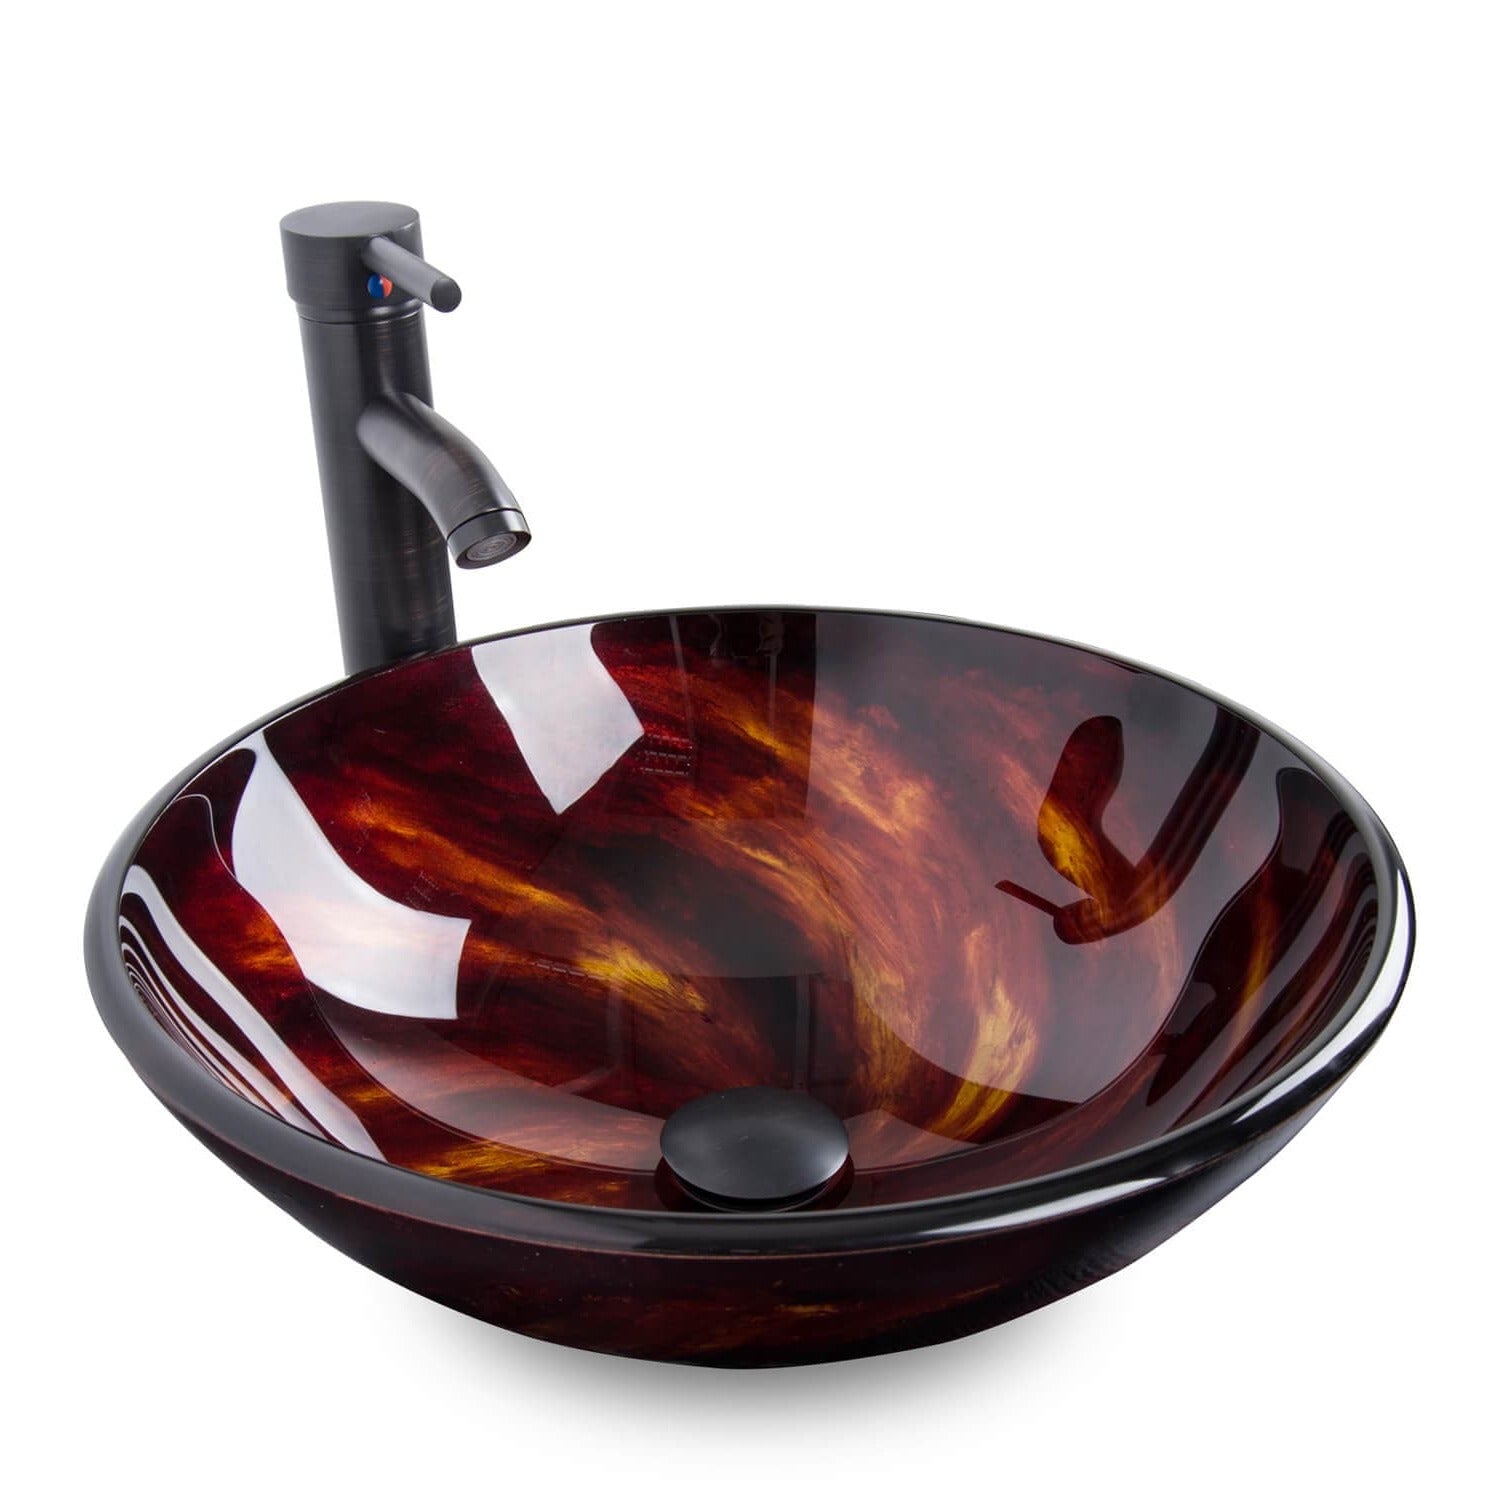 Elecwish Vessel Sinks Bathroom Artistic Vessel Sink Glass Bowl Drain Faucet Combo,Flame Red